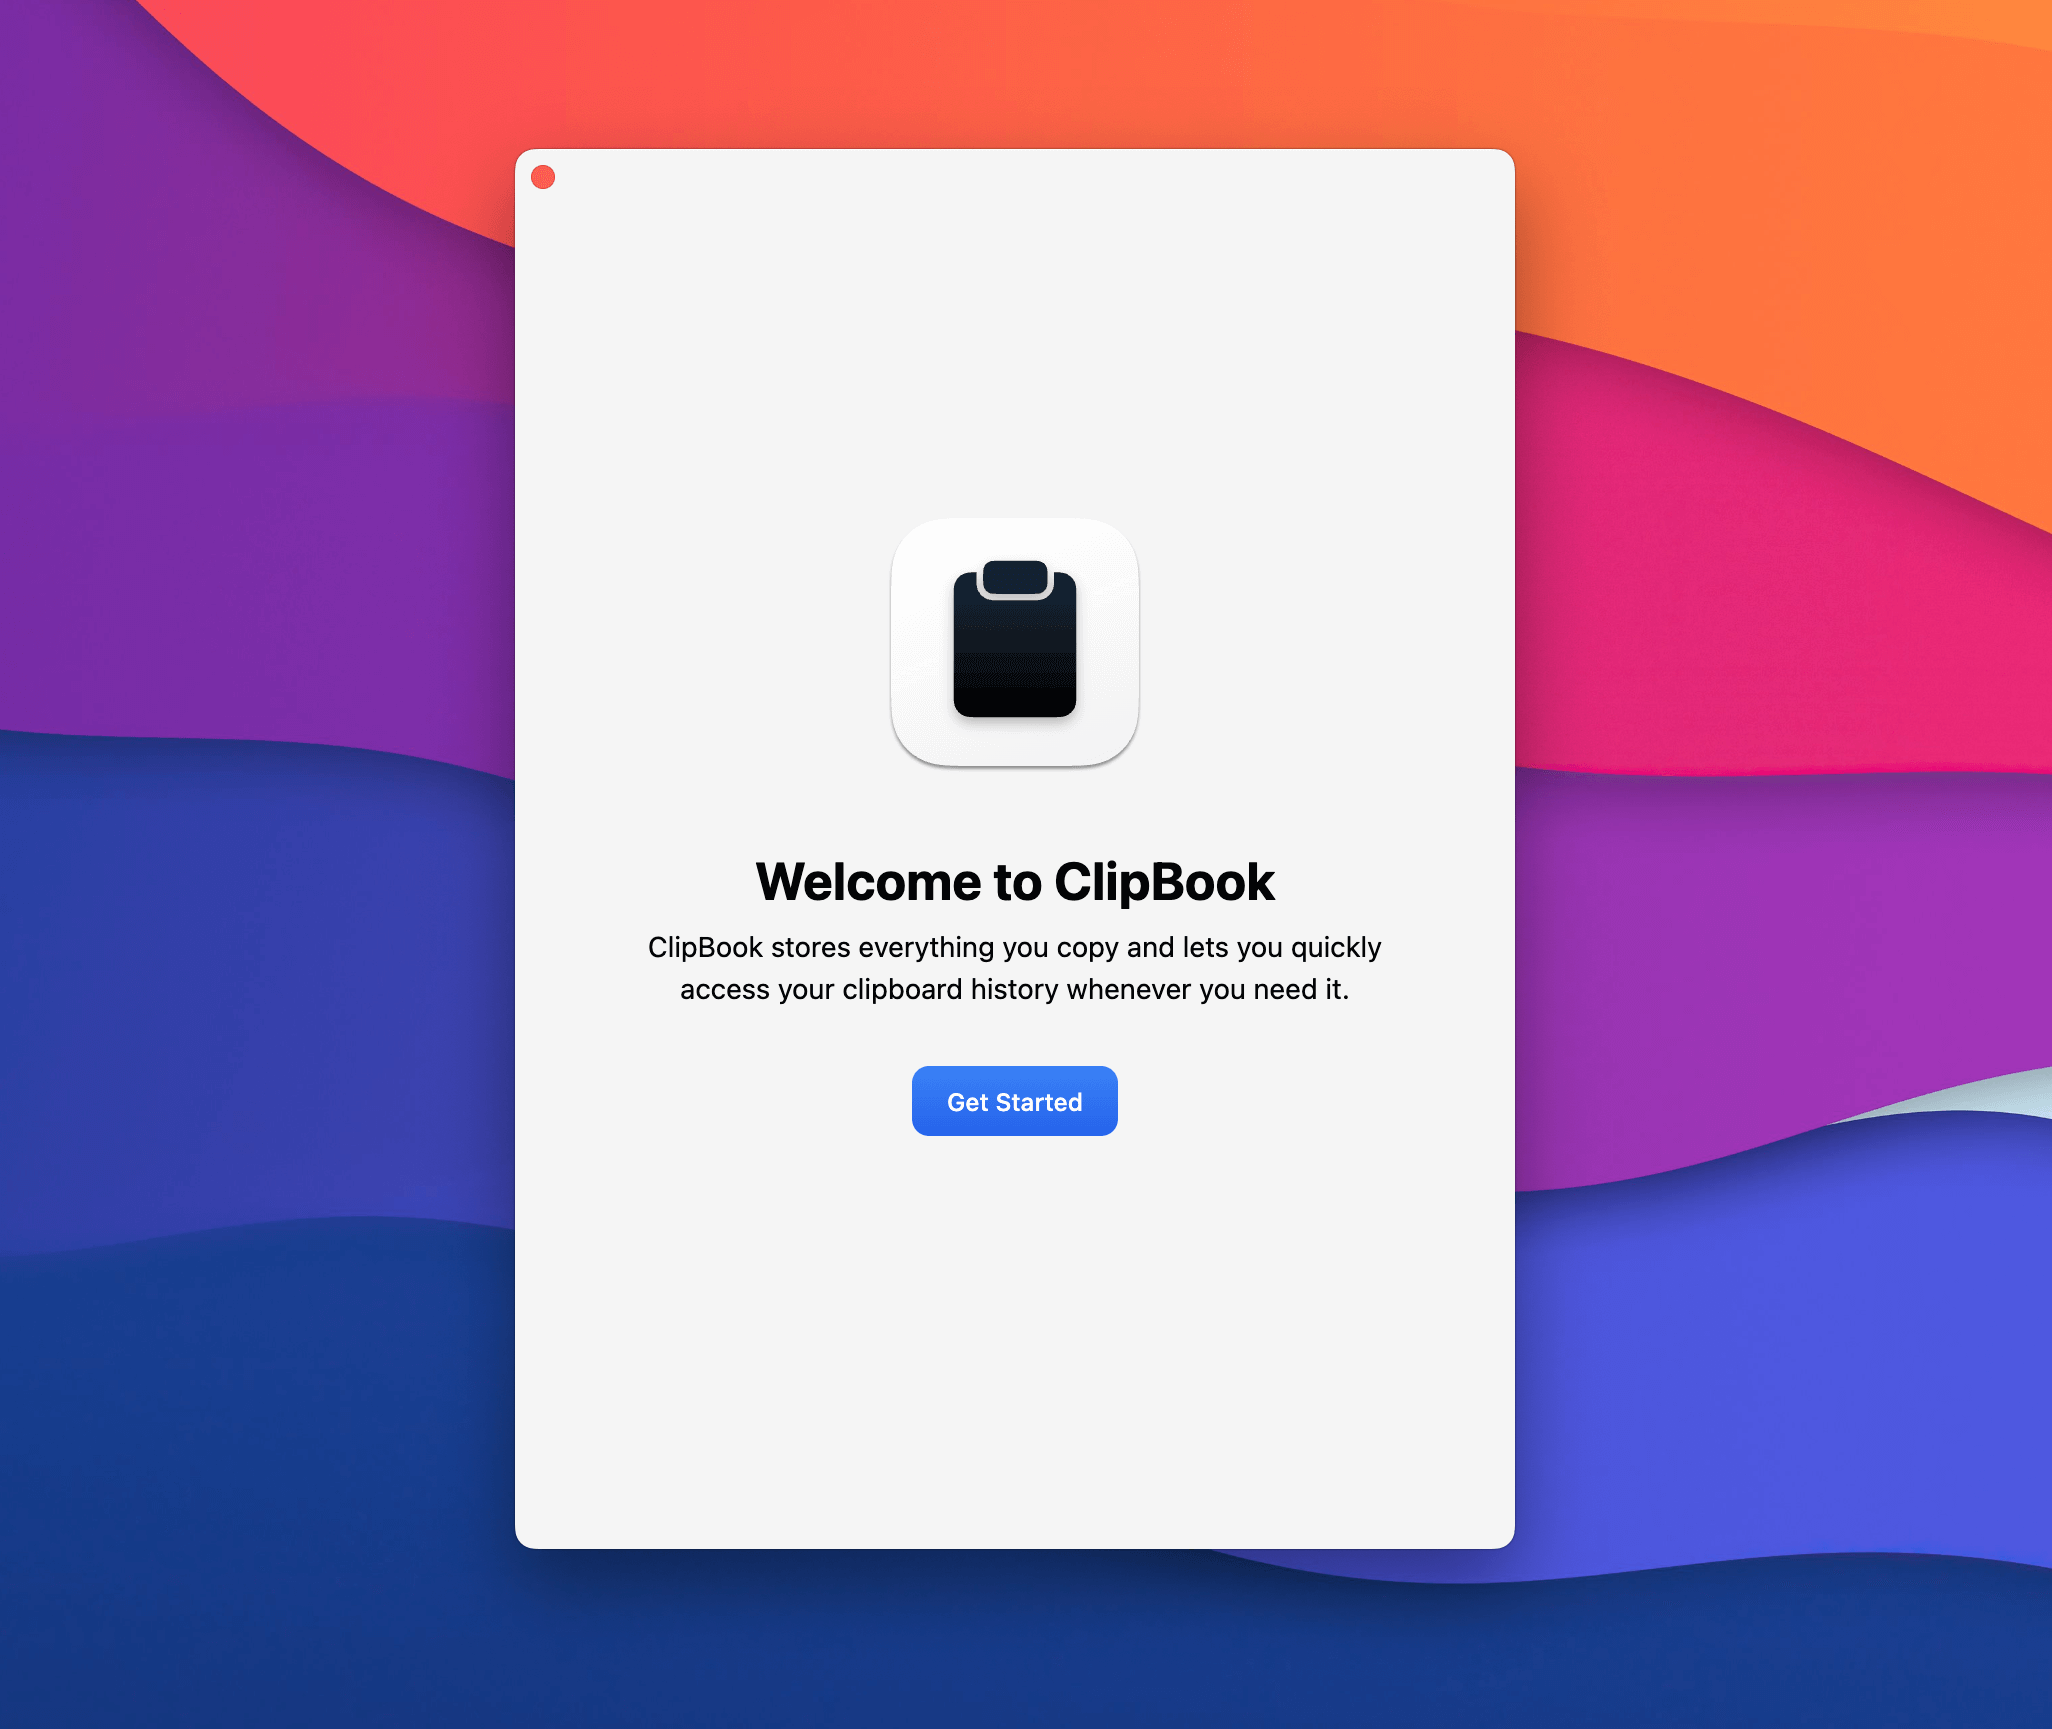 ClipBook welcome screen: getting started section